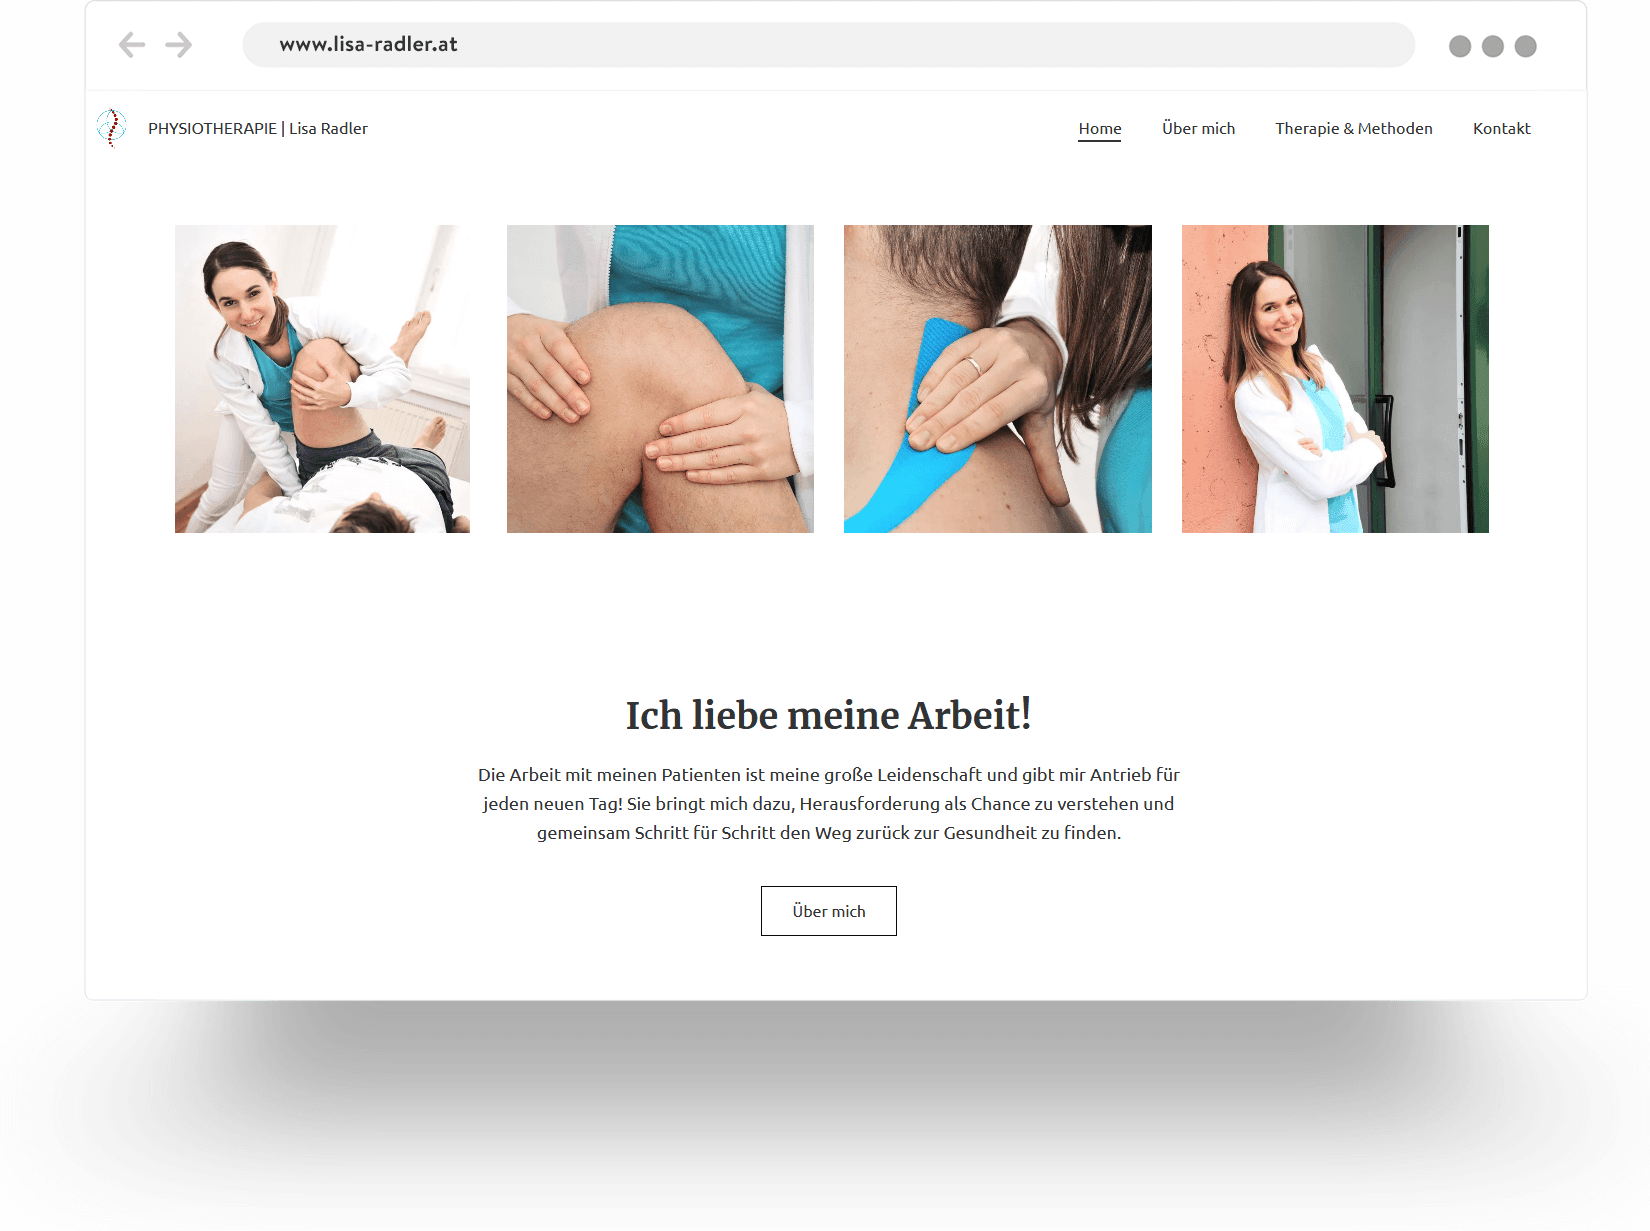 Example of a physiotherapist website built with Jimdo showing a female therapist treating her patients